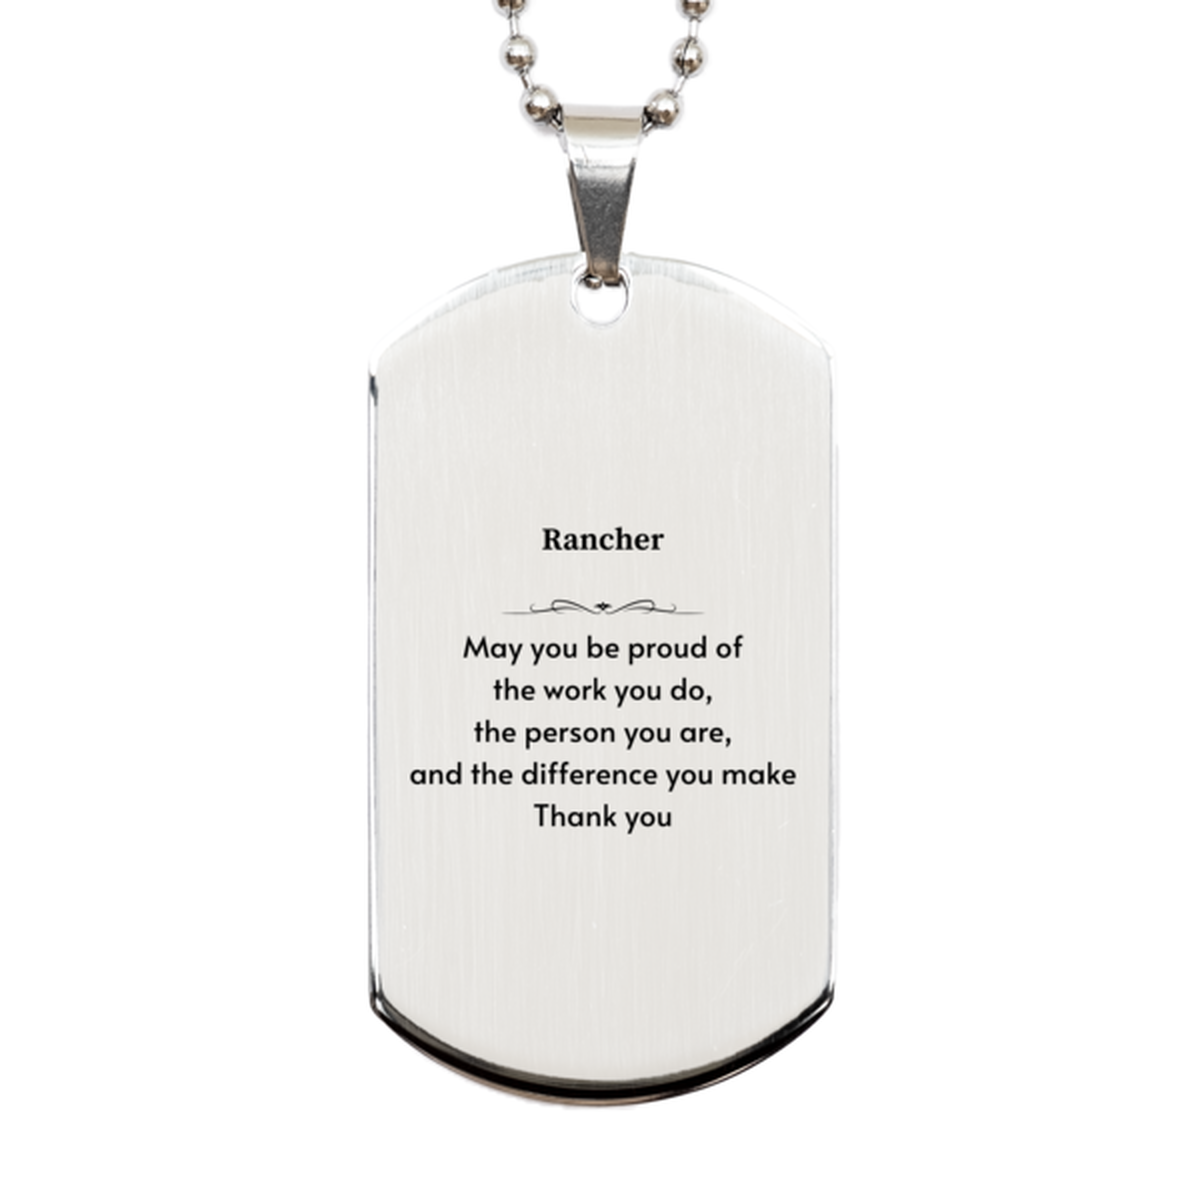 Heartwarming Silver Dog Tag Retirement Coworkers Gifts for Rancher, Rancher May You be proud of the work you do, the person you are Gifts for Boss Men Women Friends